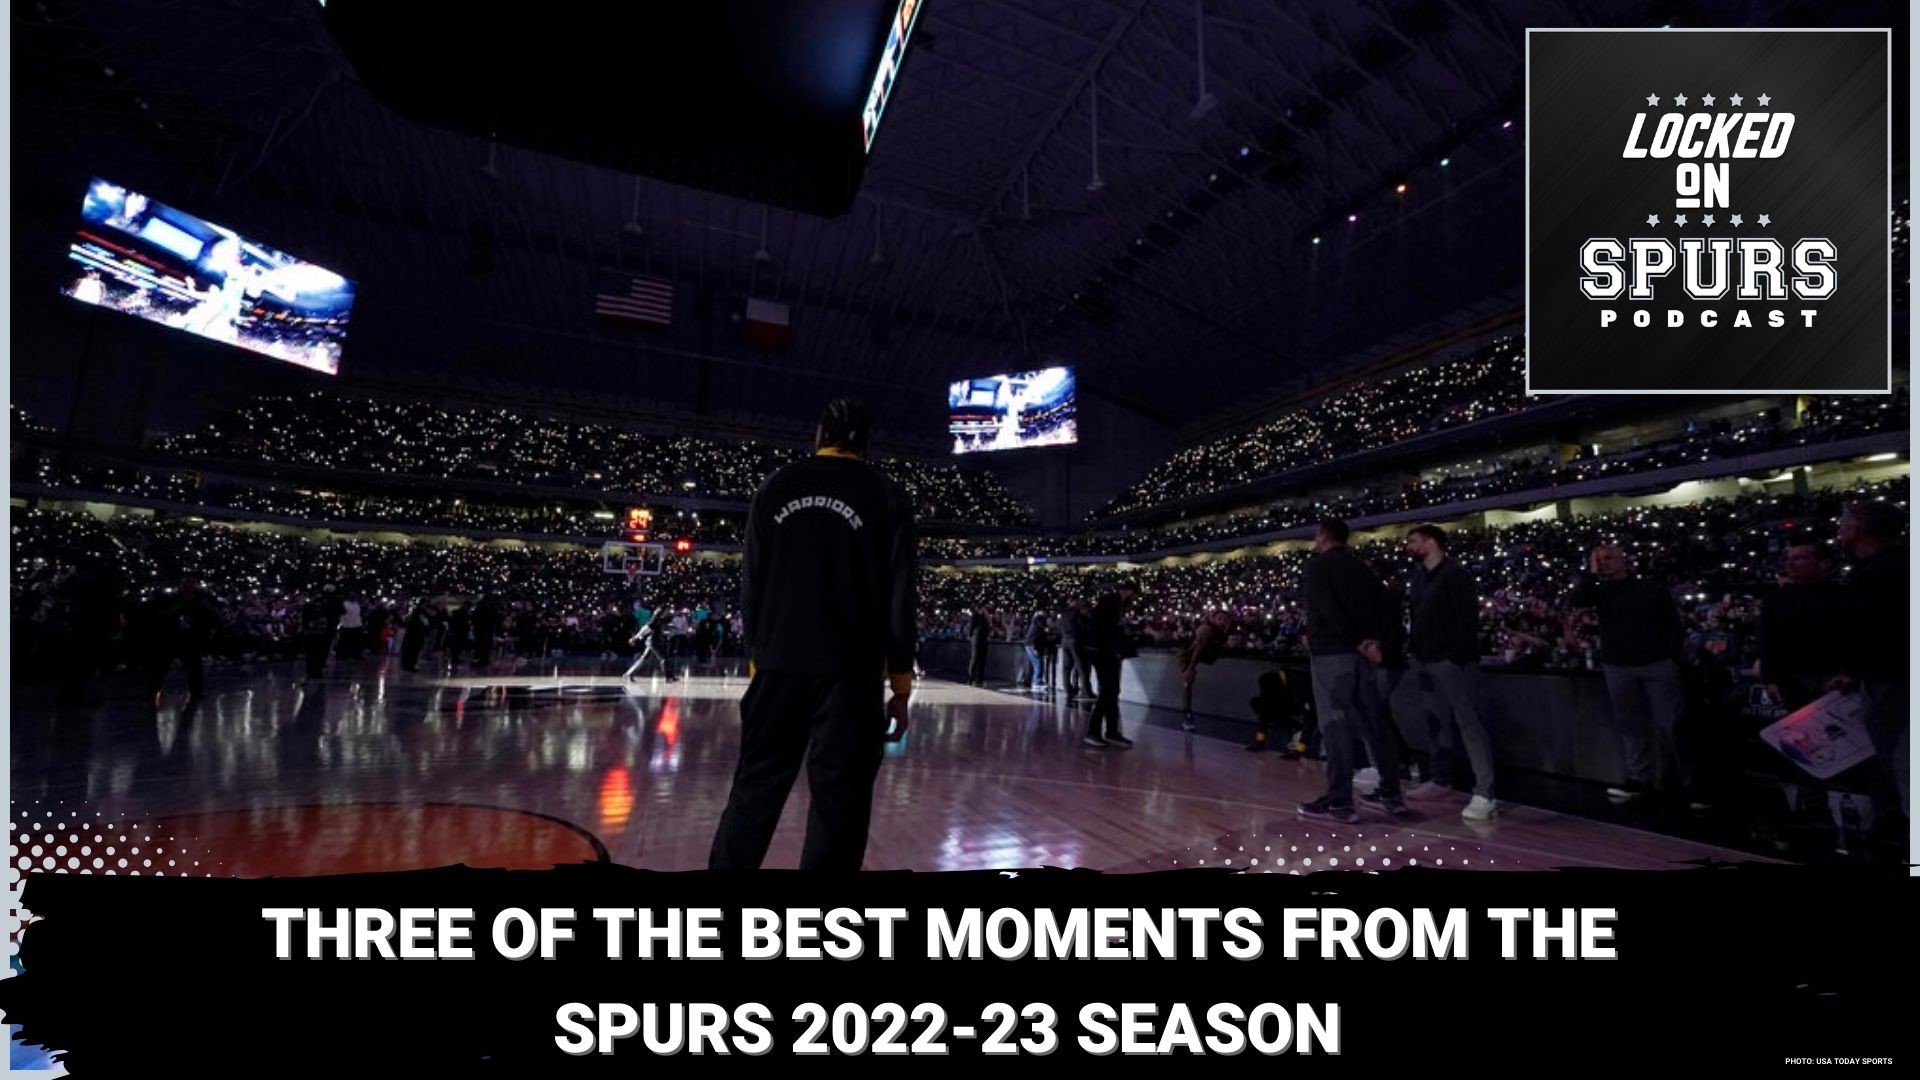 Here are a few great moments from last season.